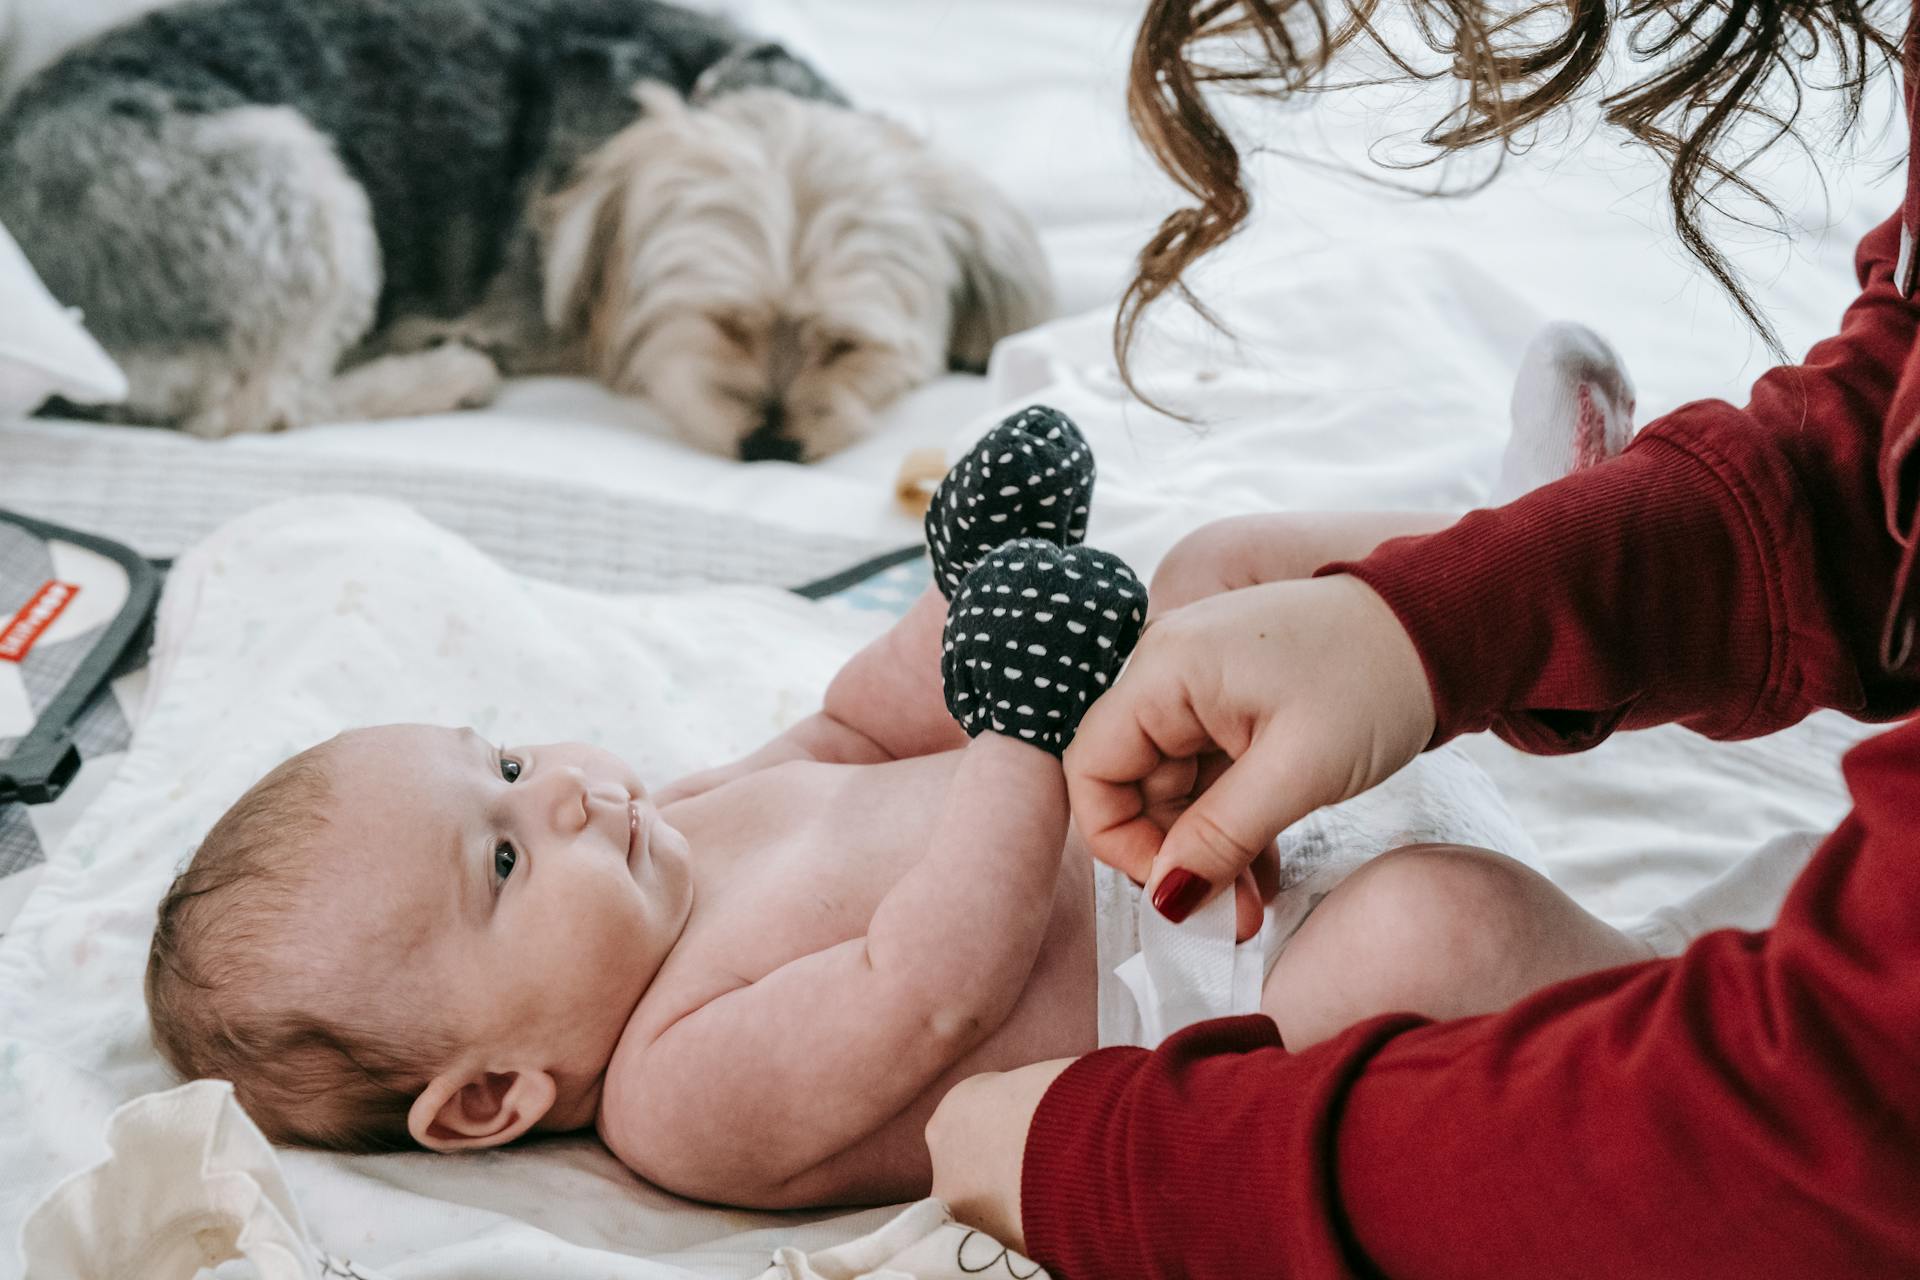 Woman changing a baby's diaper | Source: Pexels